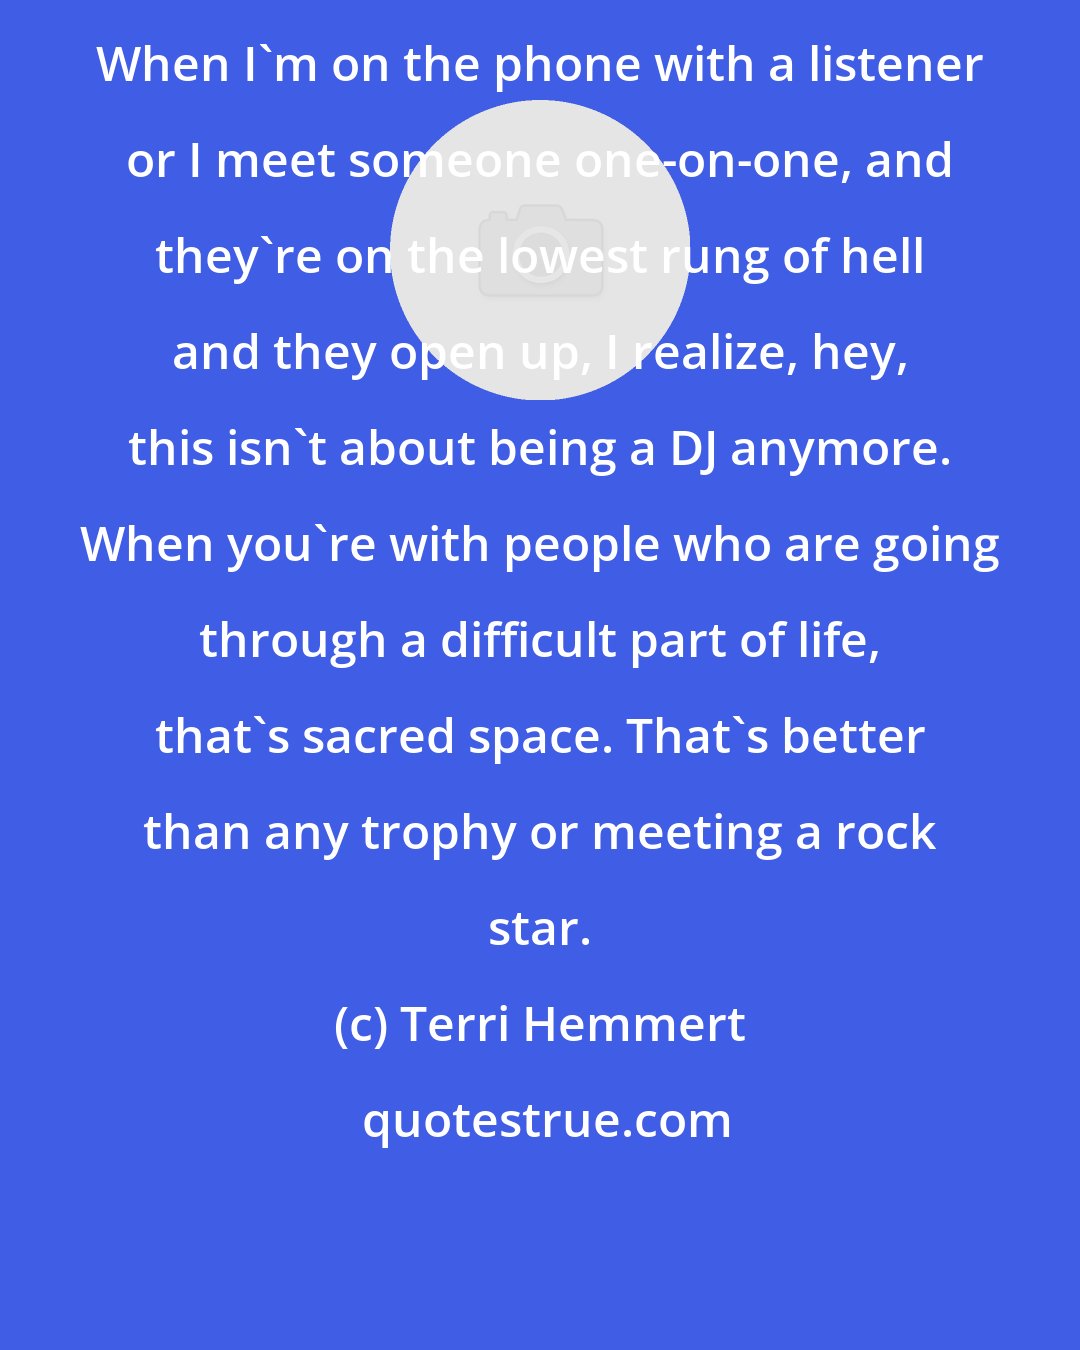 Terri Hemmert: When I'm on the phone with a listener or I meet someone one-on-one, and they're on the lowest rung of hell and they open up, I realize, hey, this isn't about being a DJ anymore. When you're with people who are going through a difficult part of life, that's sacred space. That's better than any trophy or meeting a rock star.